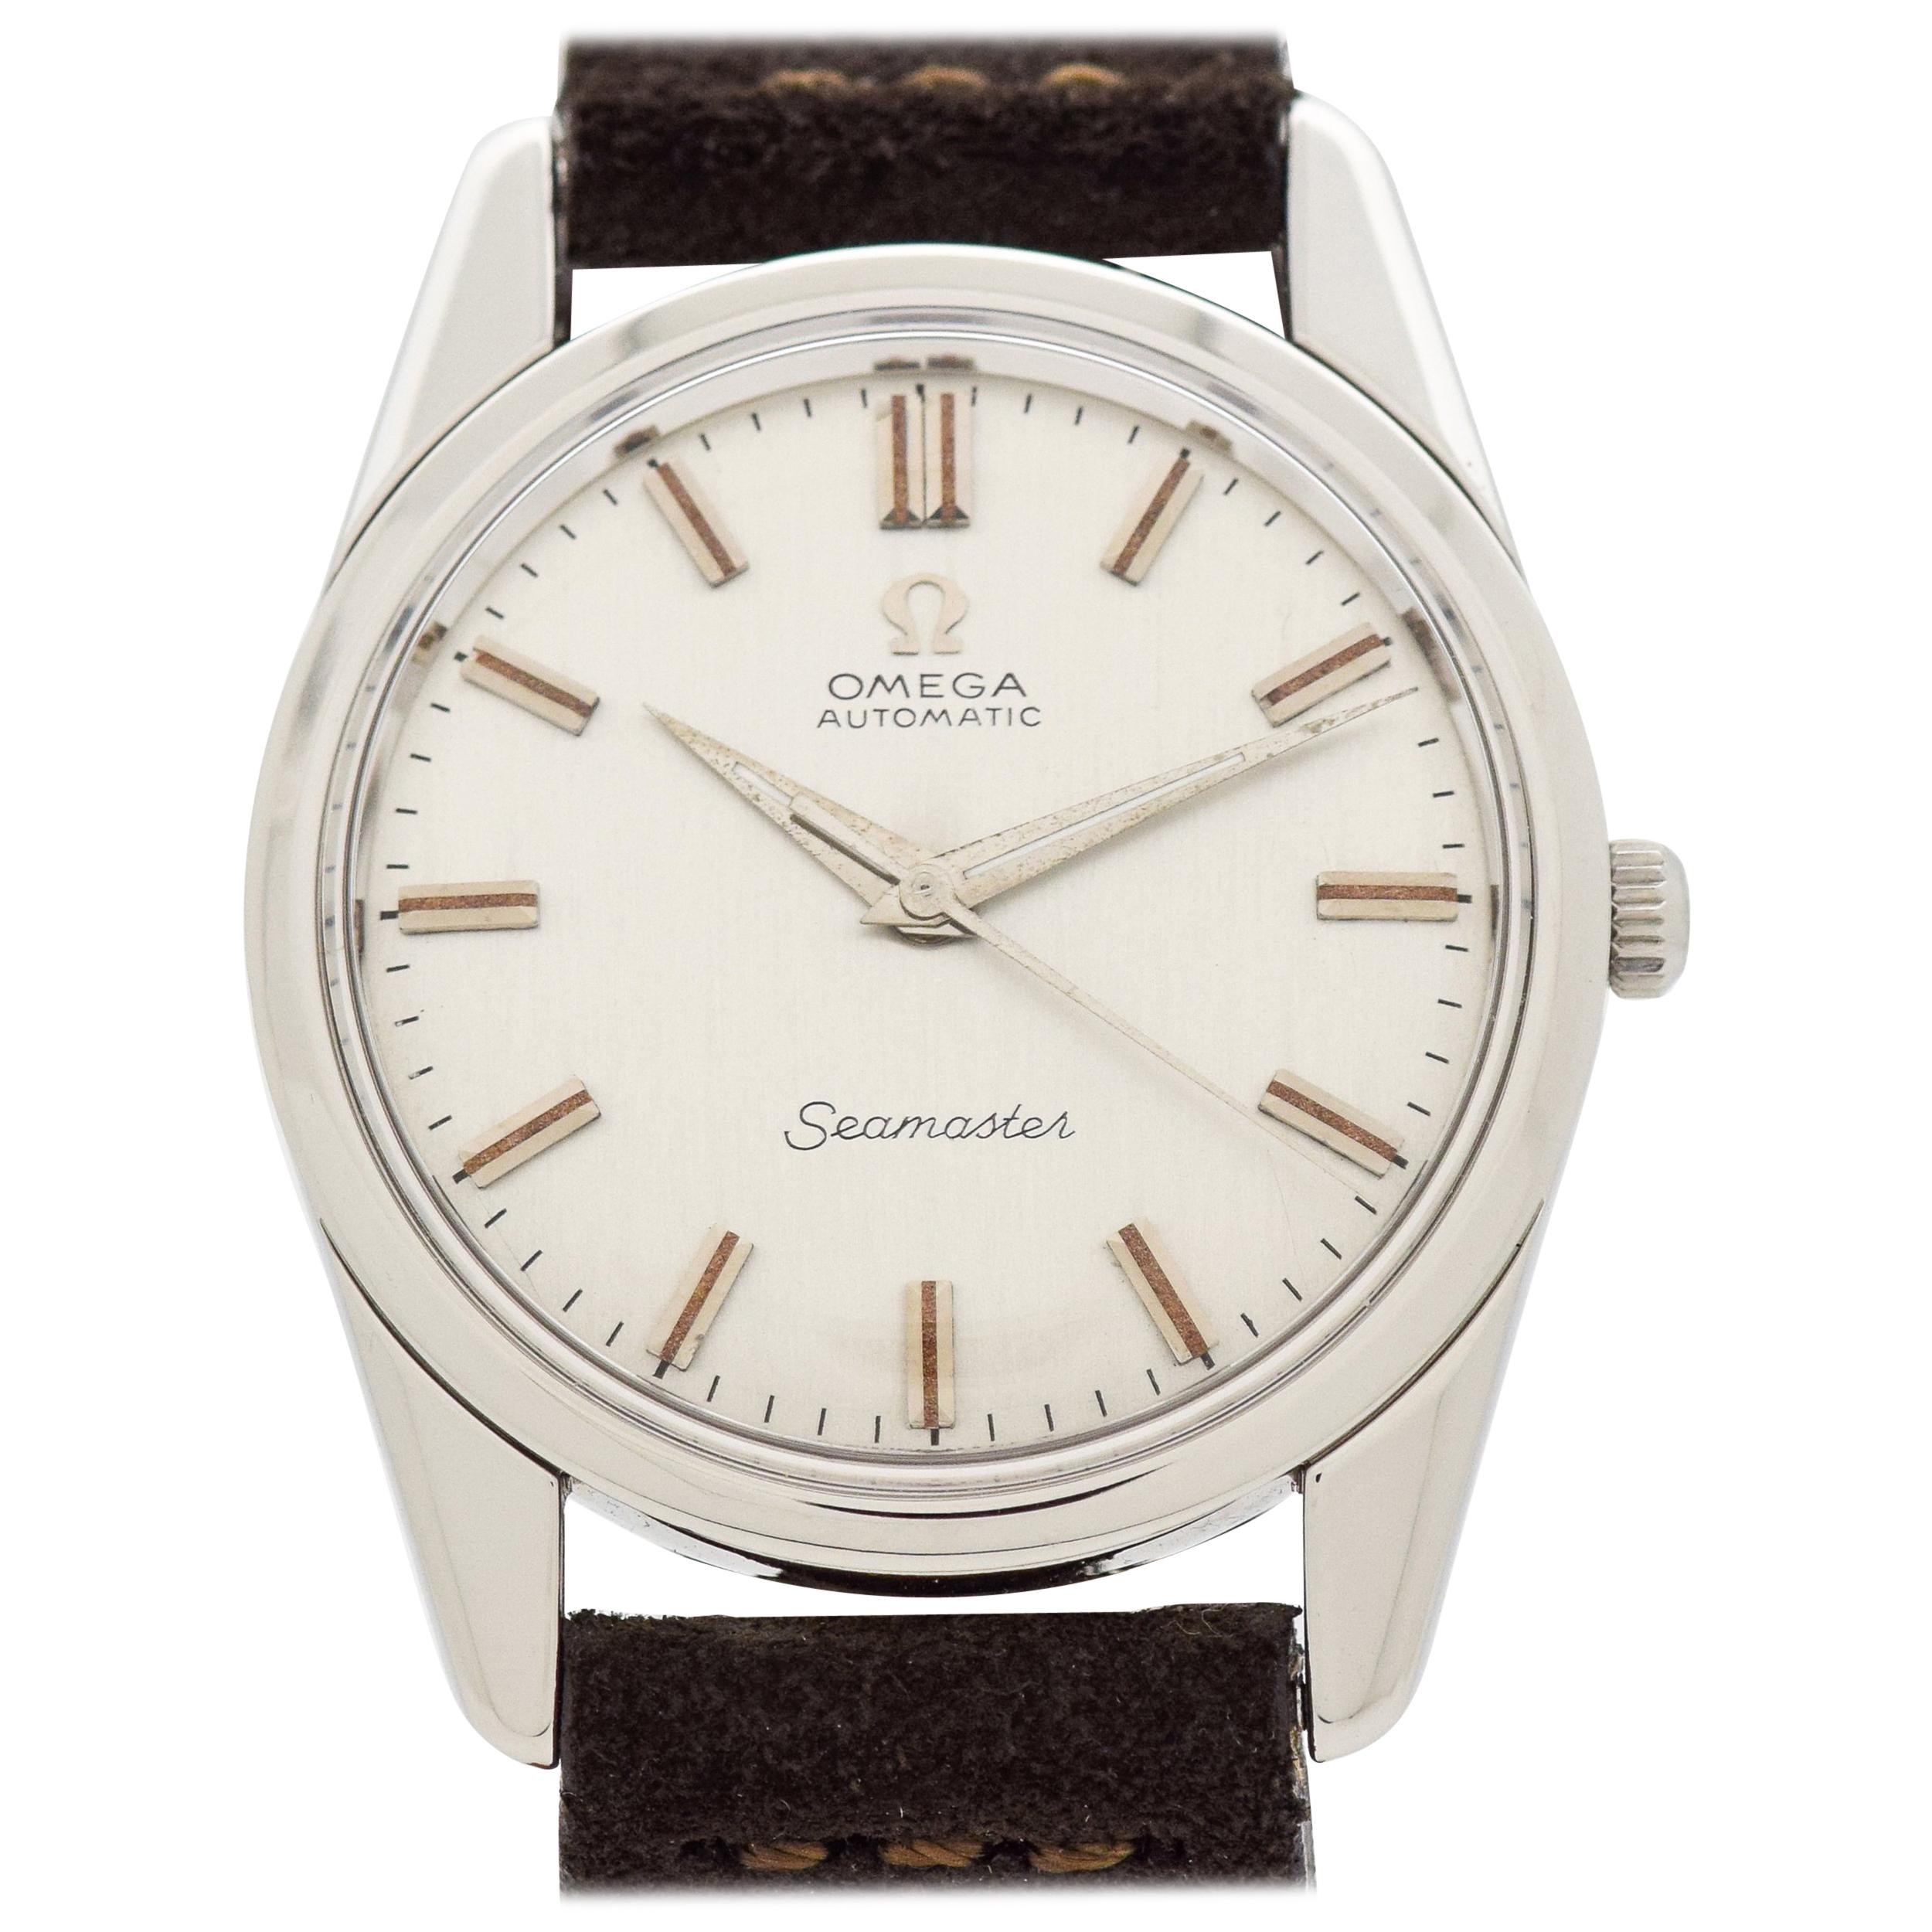 Vintage Omega Seamaster Automatic Stainless Steel Watch, 1959 For Sale